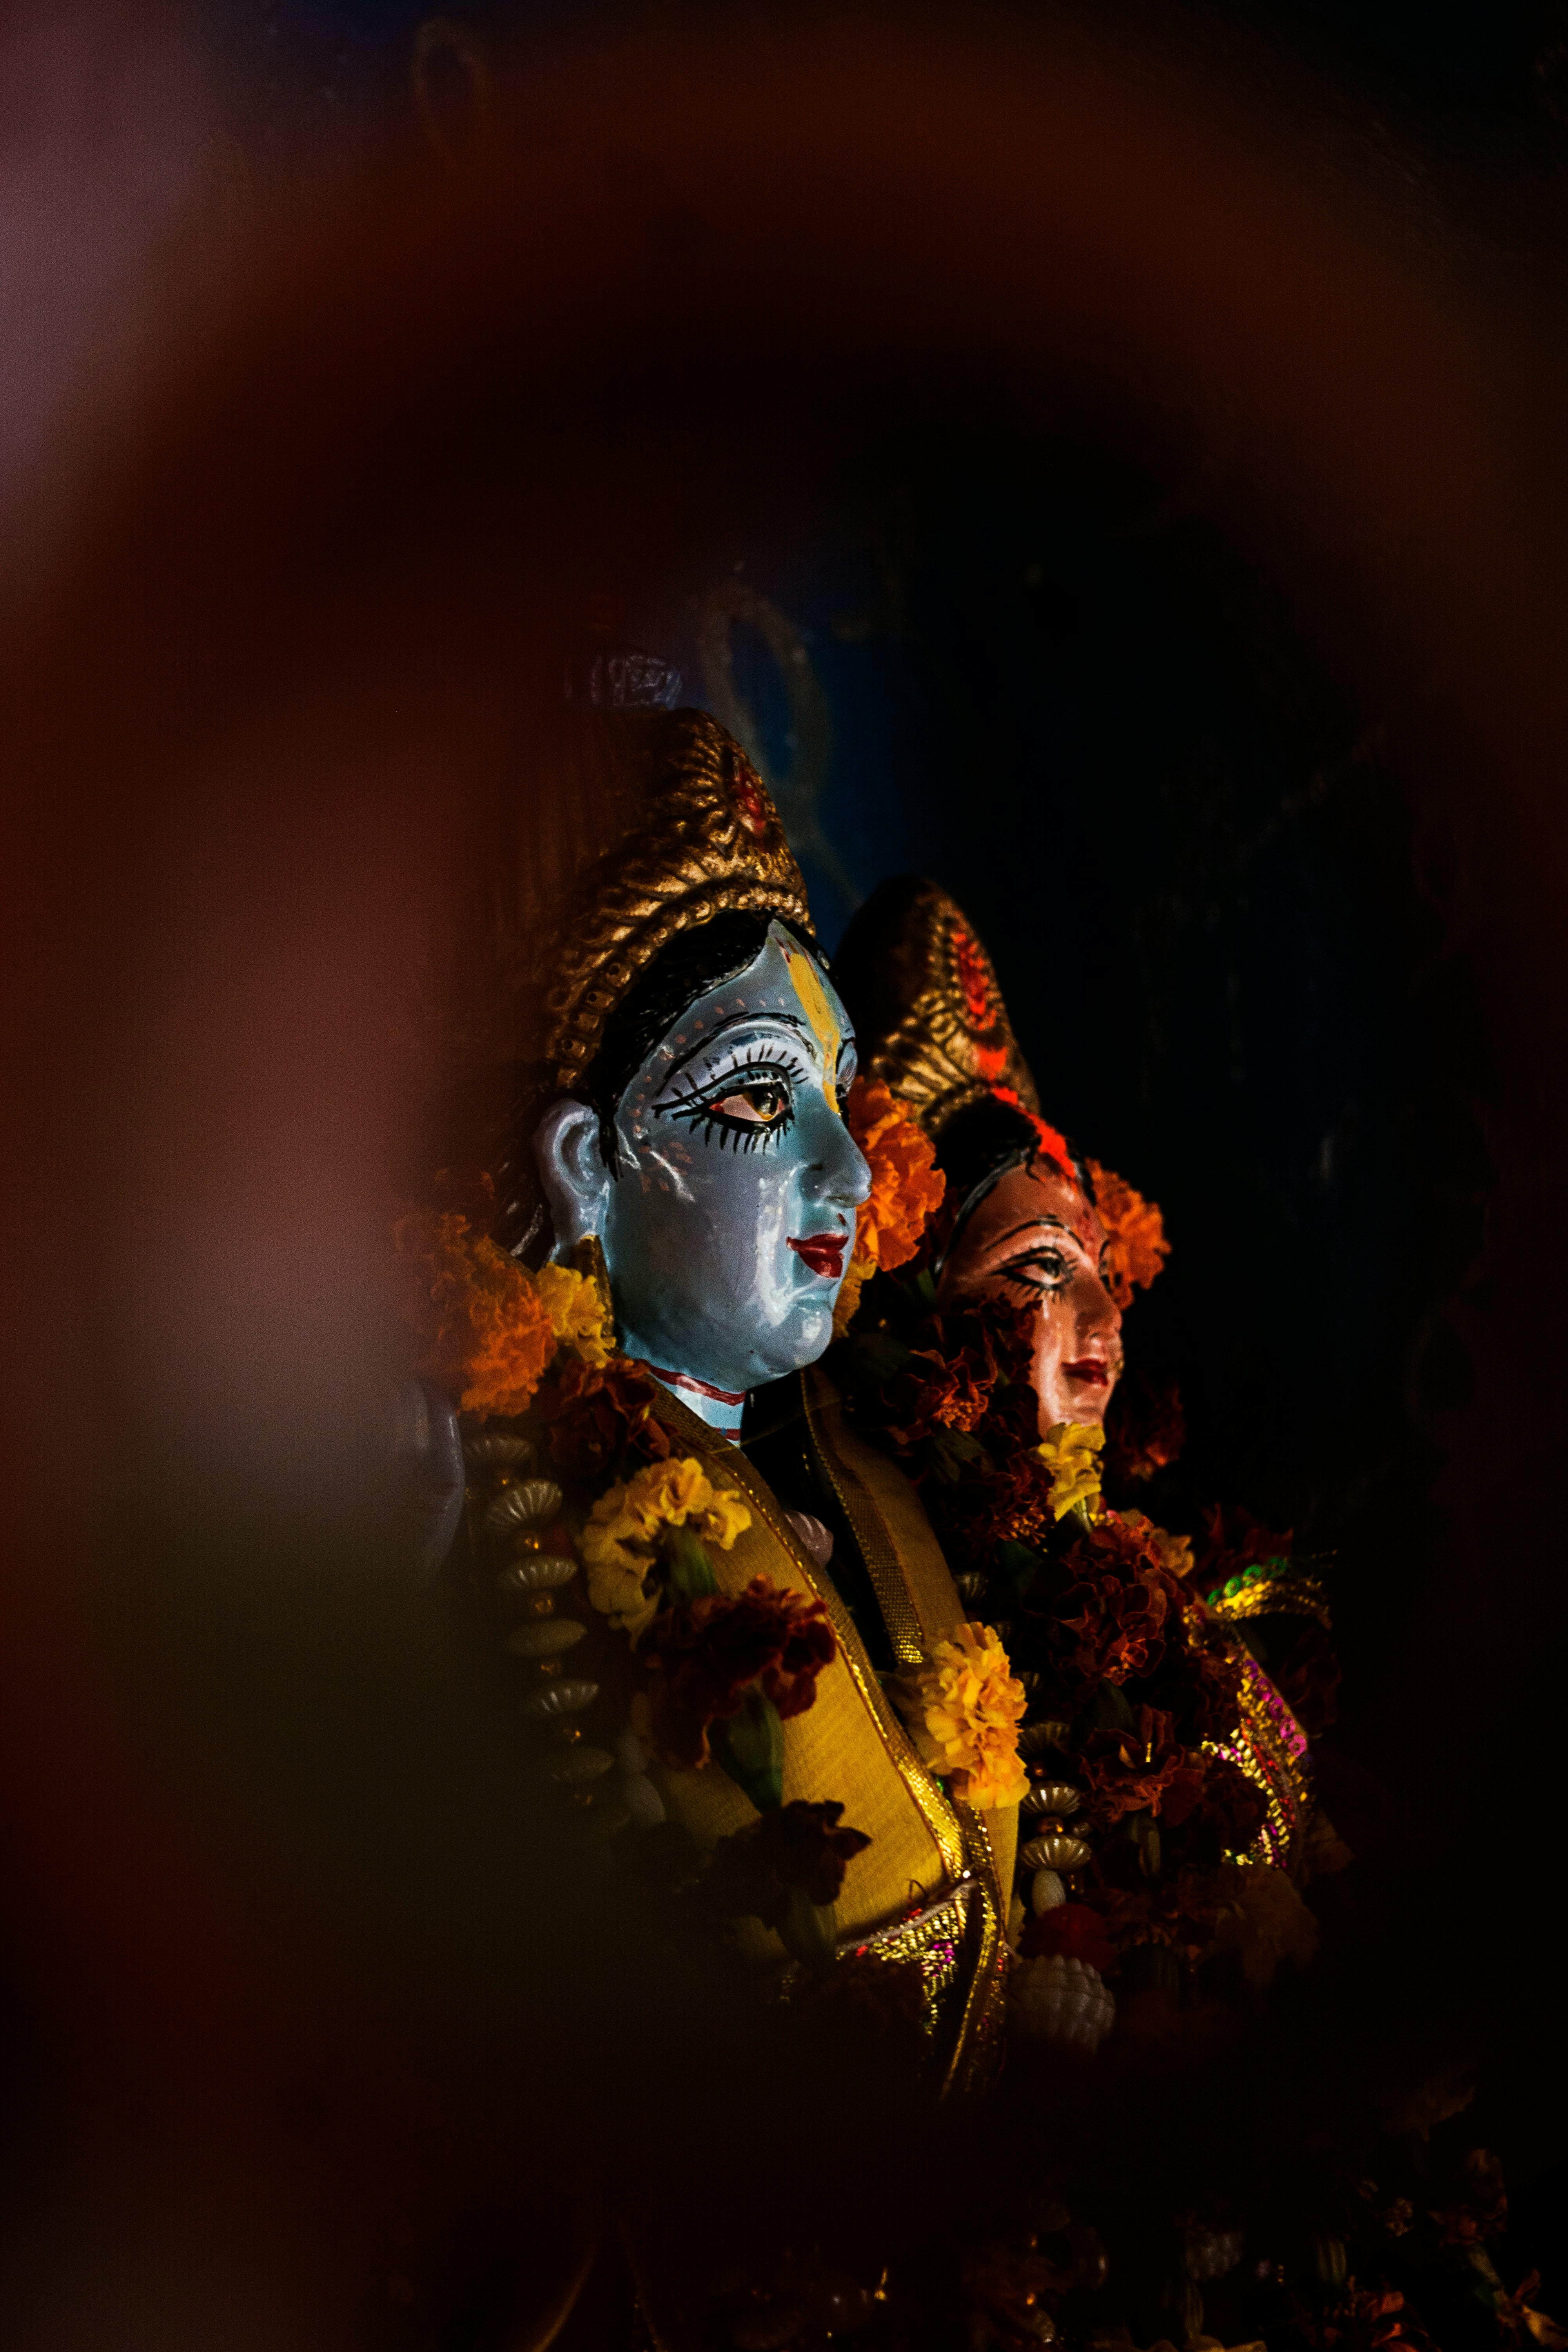 All Hindu God Wallpapers And Images  Whoa